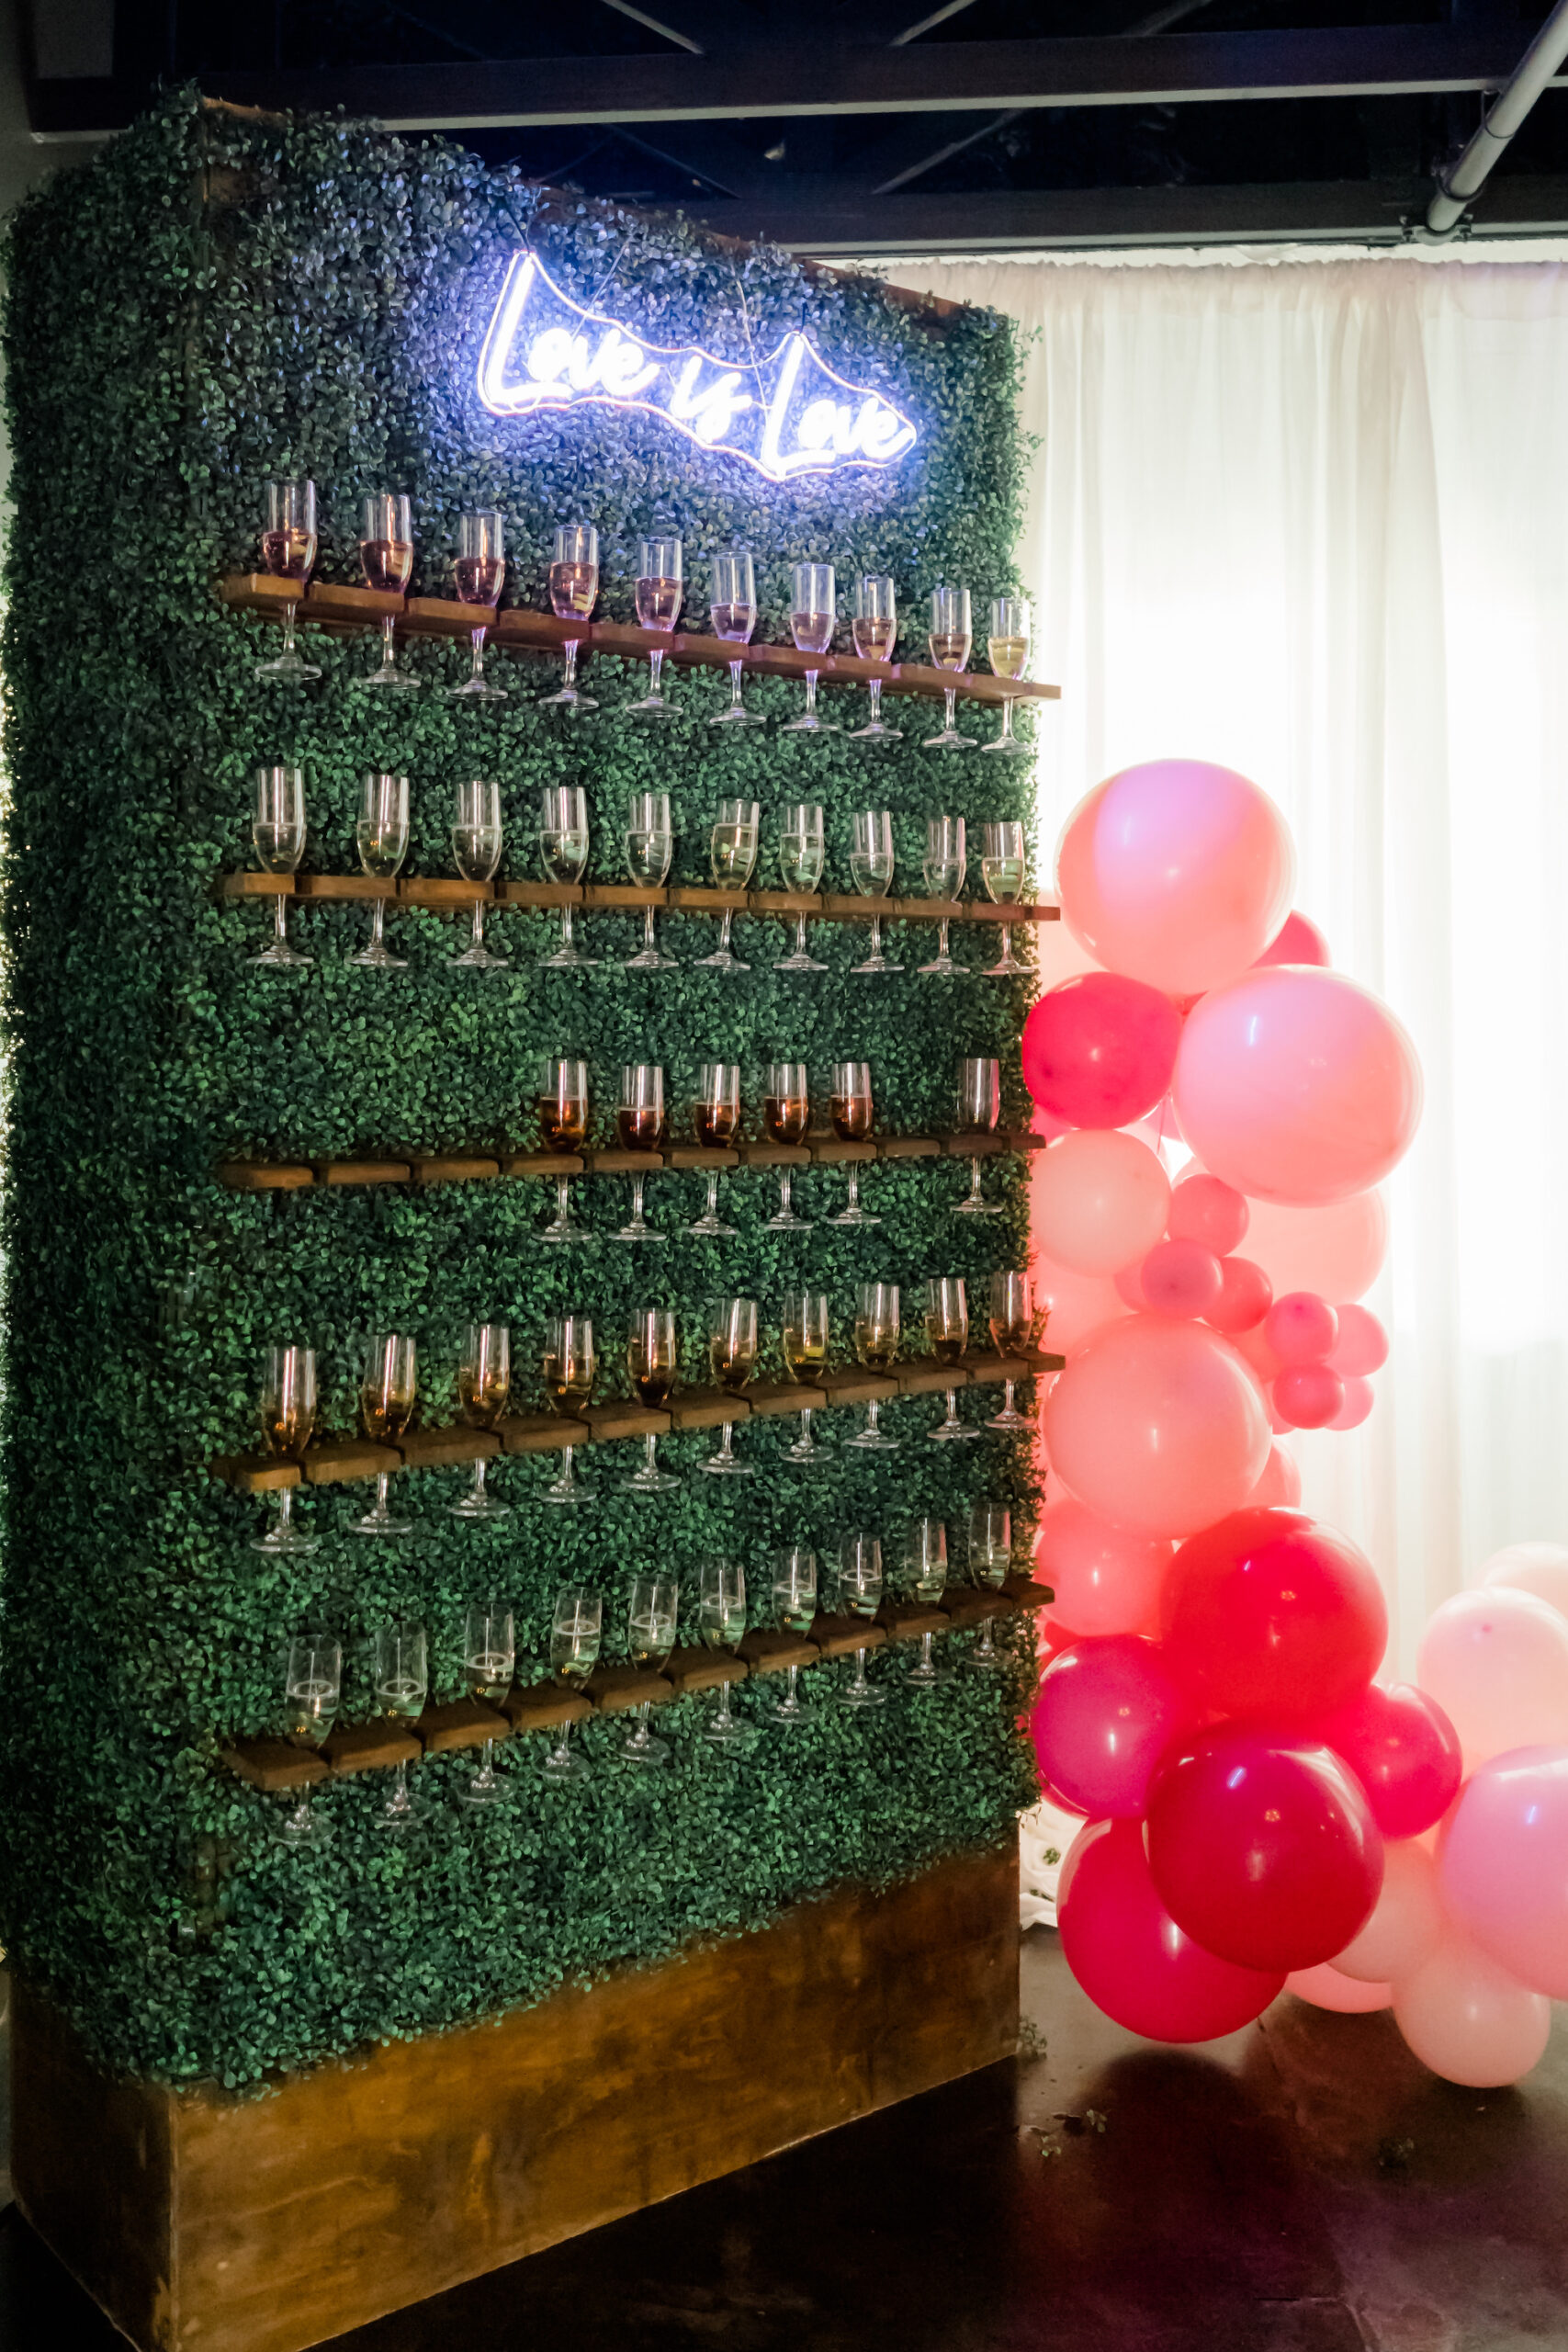 Whimsical Wedding Reception Decor, Pink Balloons, Greenery Panel Champagne Wall with White Neon Love is Love Sign | Tampa Bay Wedding Rentals Gabro Event Services | Venue The West Events